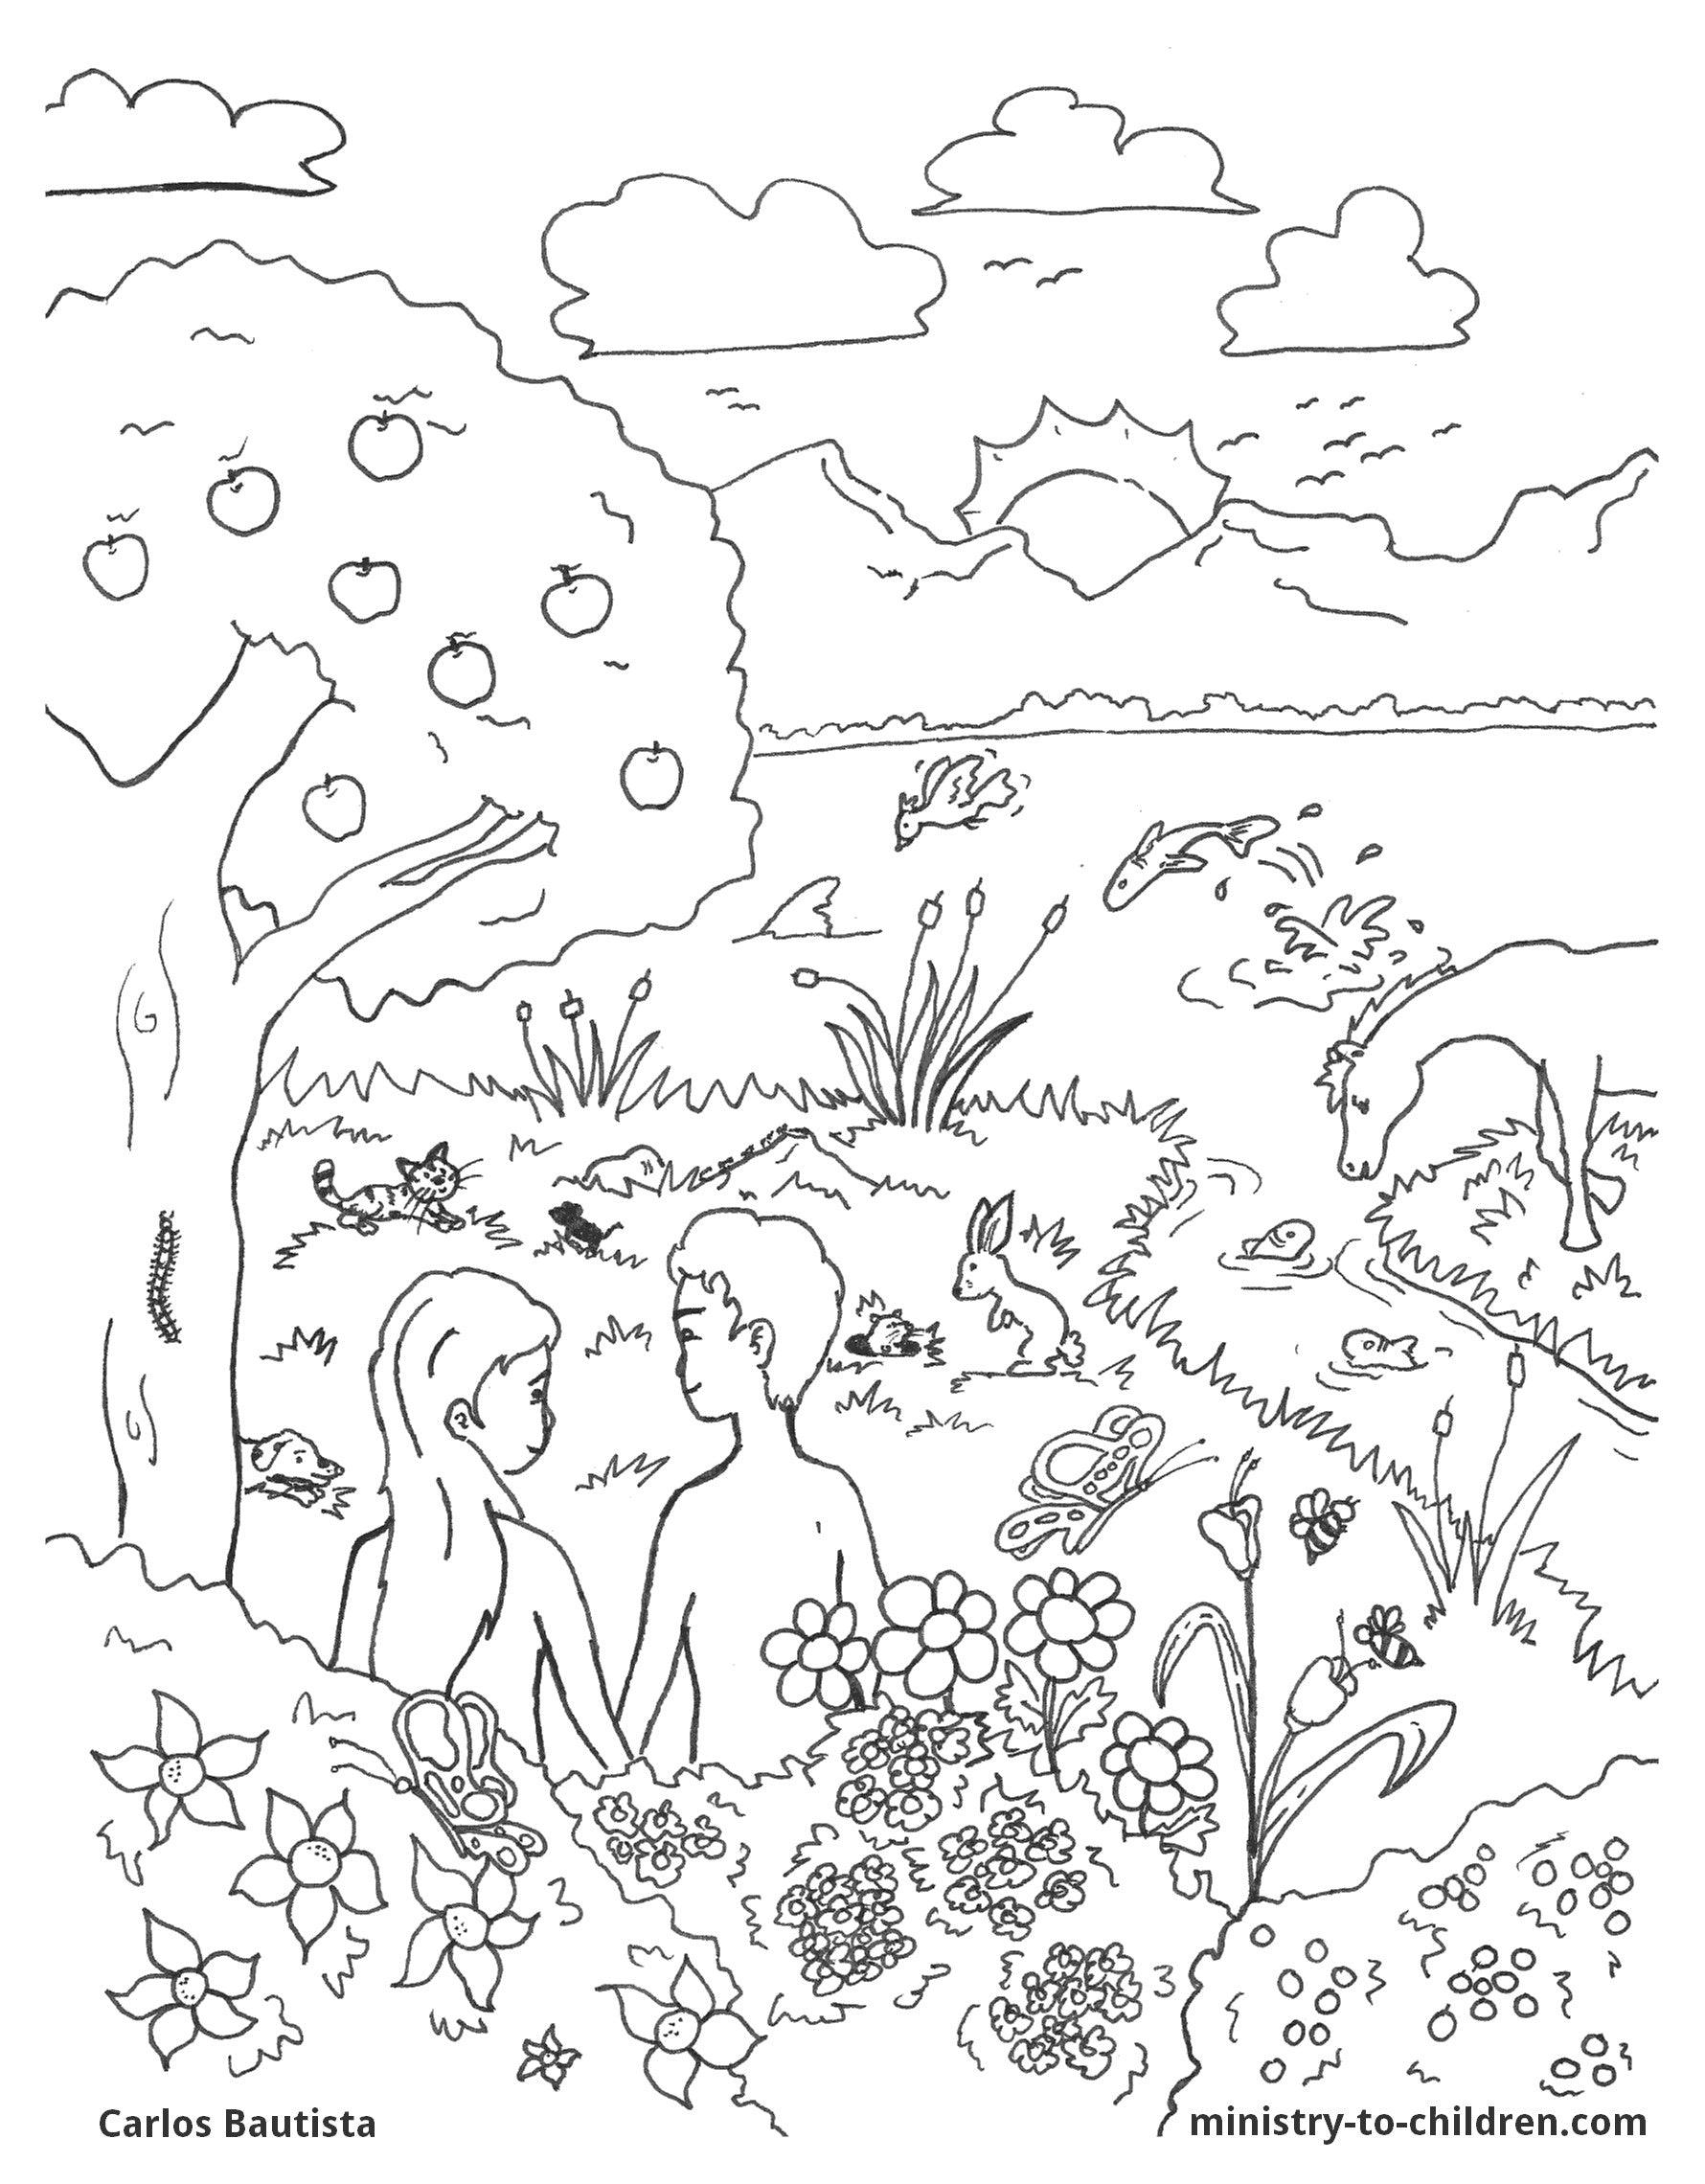 6 days of creation coloring pages